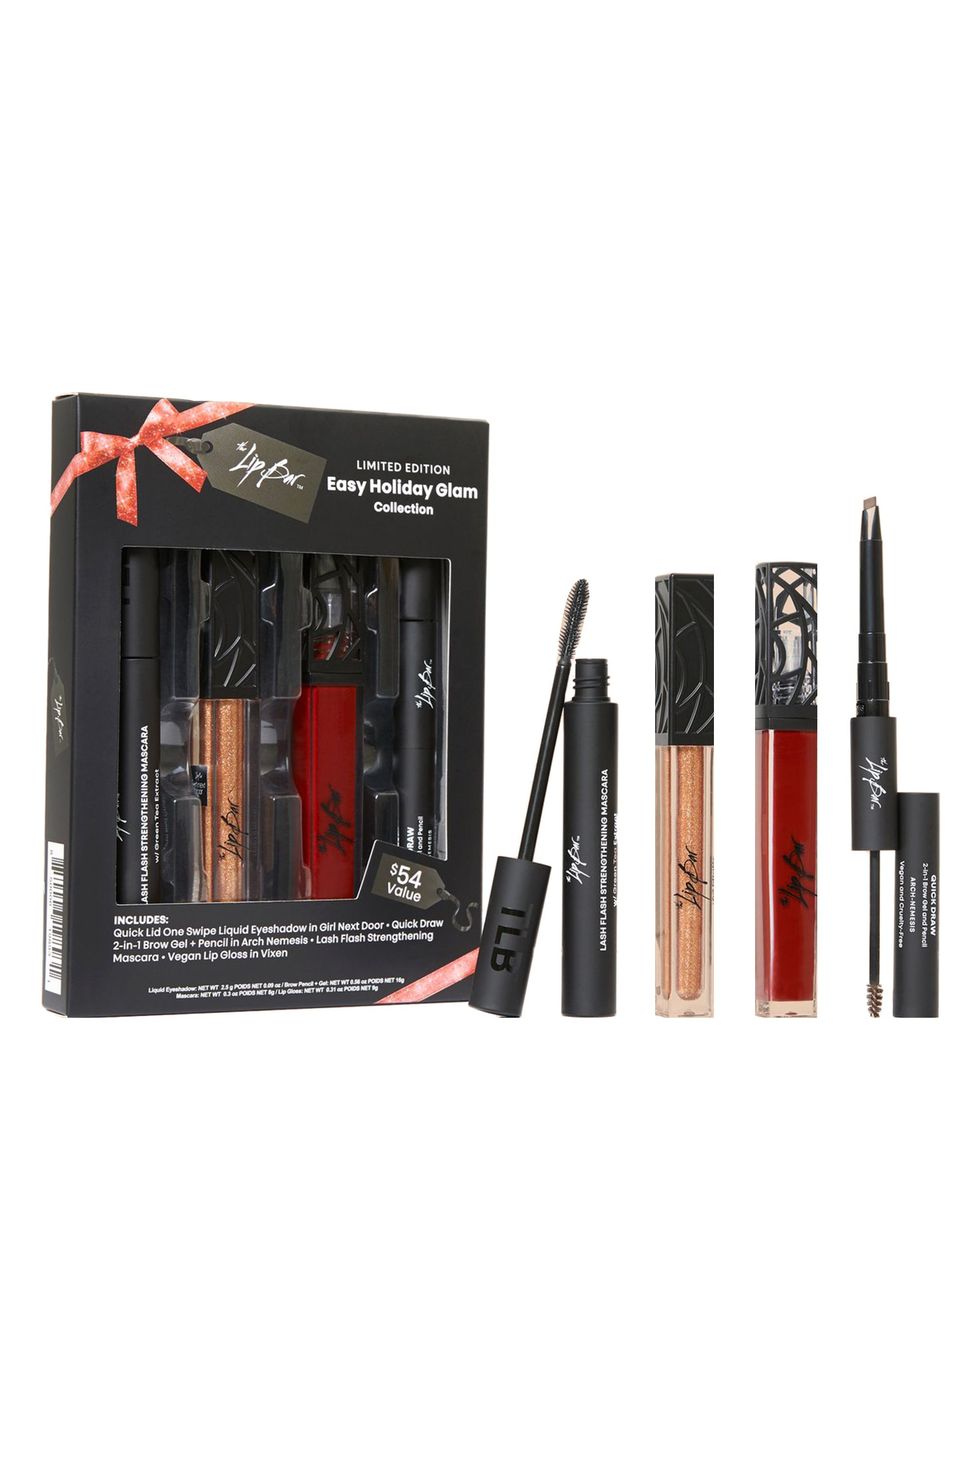 Easy Holiday Glam Collection Bundle